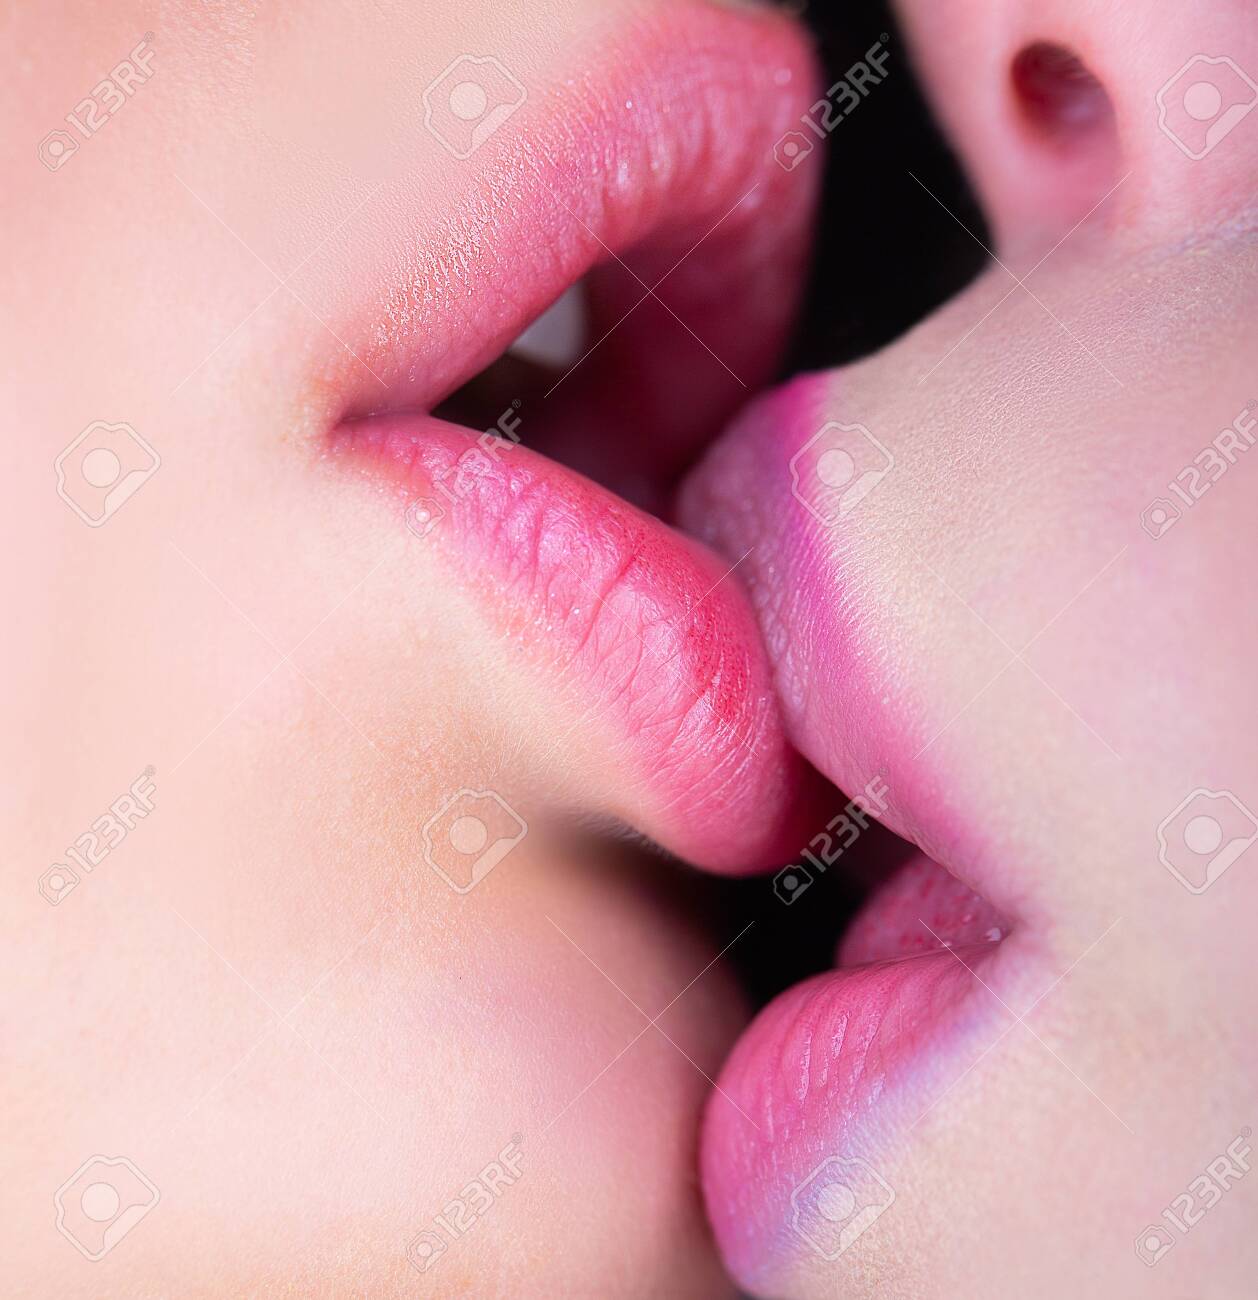 colt windham recommends hottest tongue kissing pic